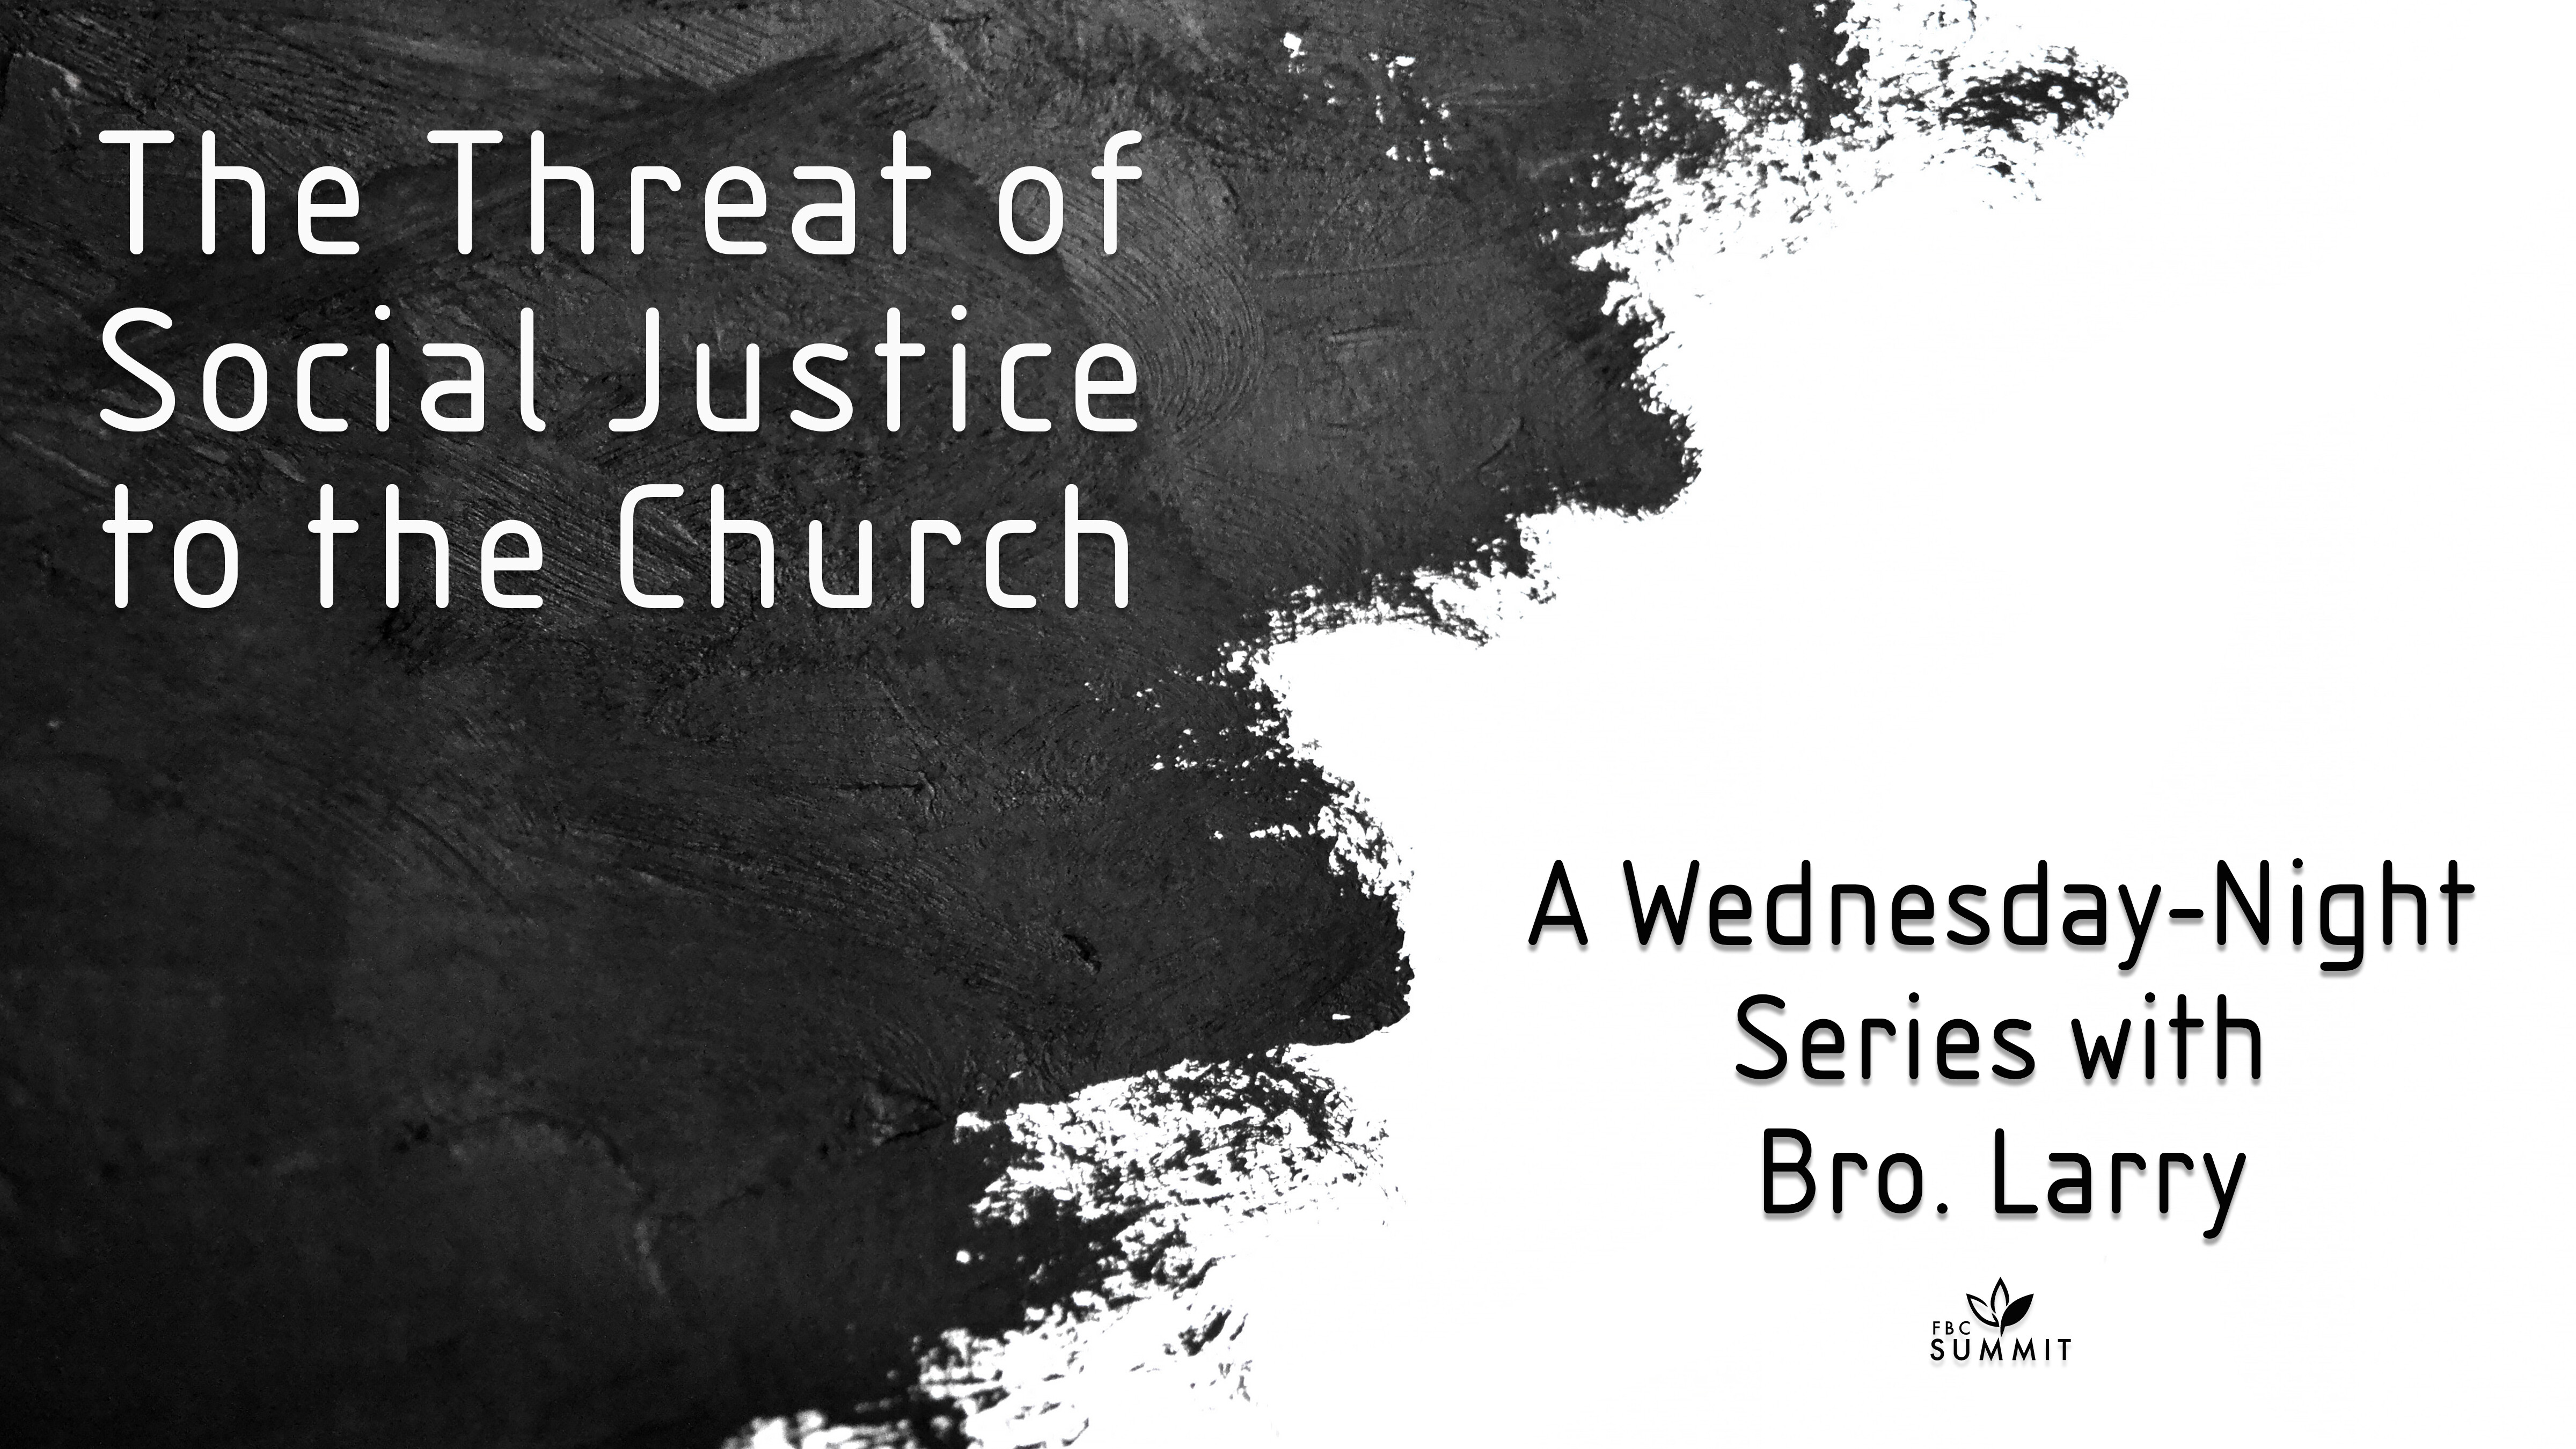 Wednesday Bible Study: "The Threat of Social Justice to the Church Part II"